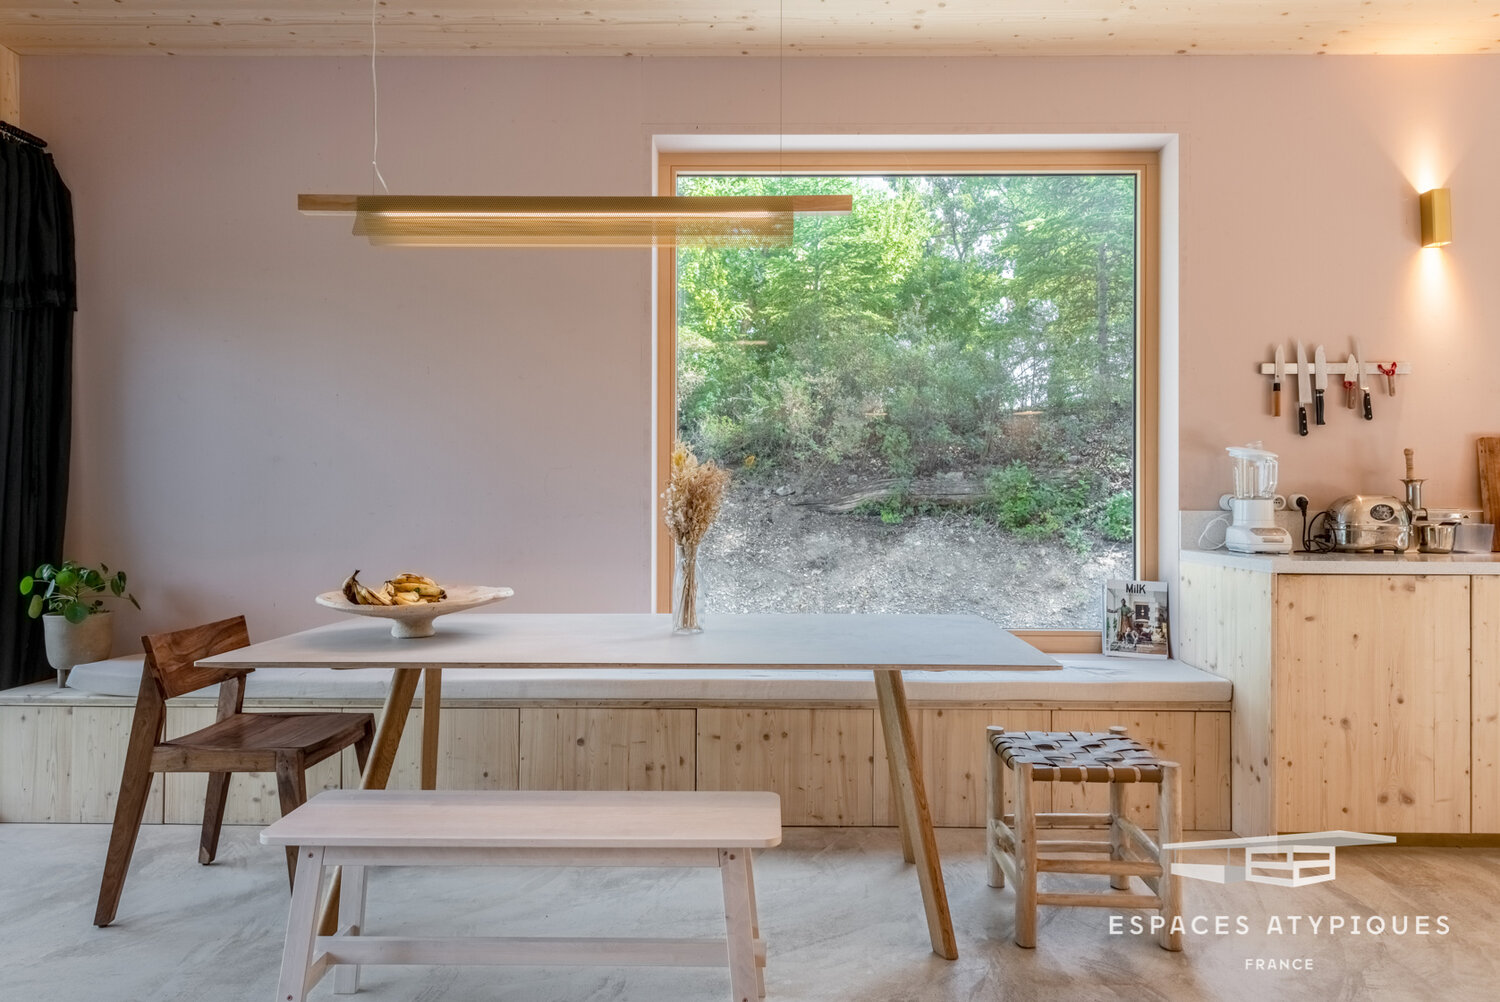 A Minimalistic Wooden Home with Amazing Views over the Provence Countryside - The Nordroom